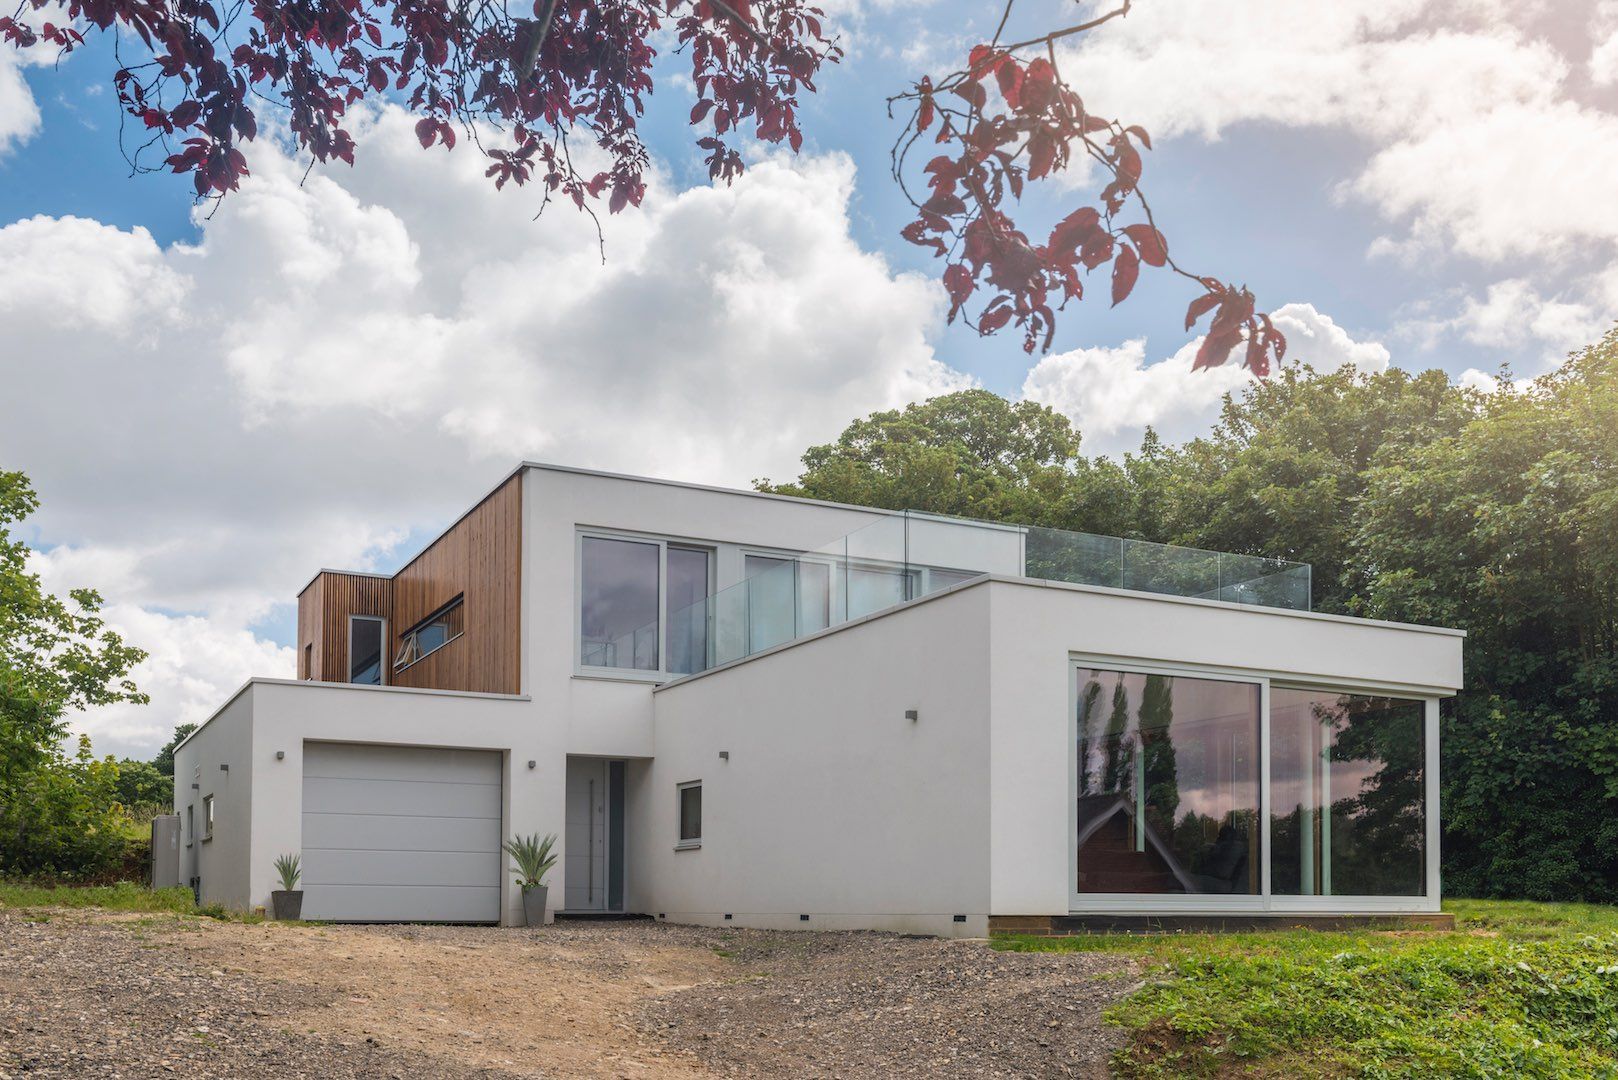 Modern House: modern by James Rowland Photography, Modern House,home,design,architecture,exterior